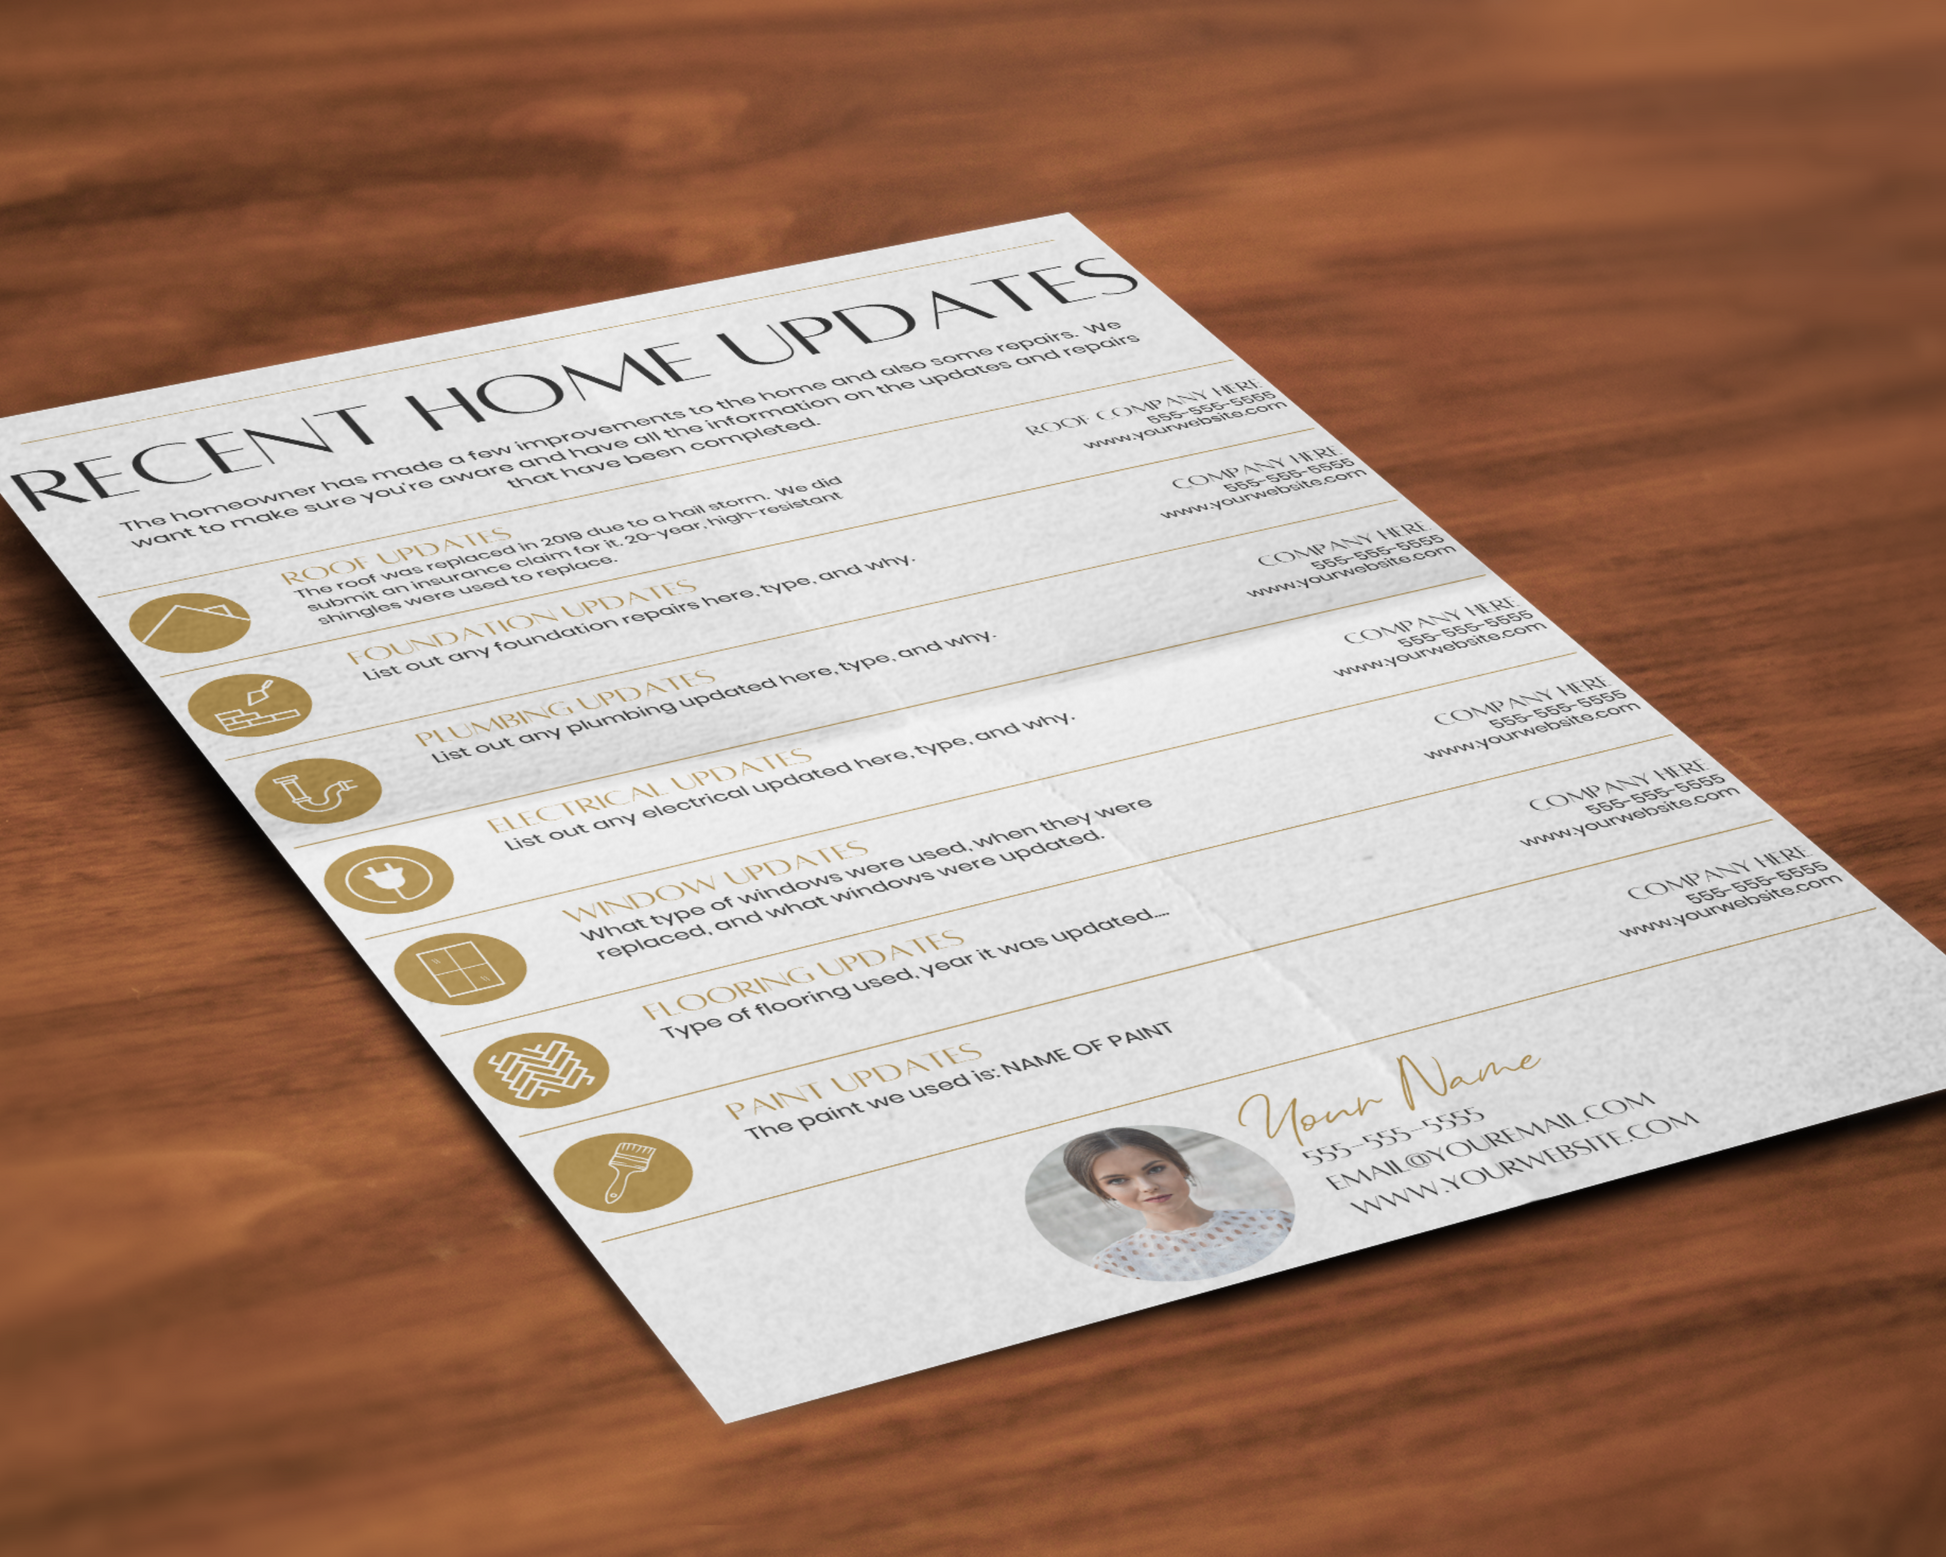 Home Update Flyer - Real Estate Template